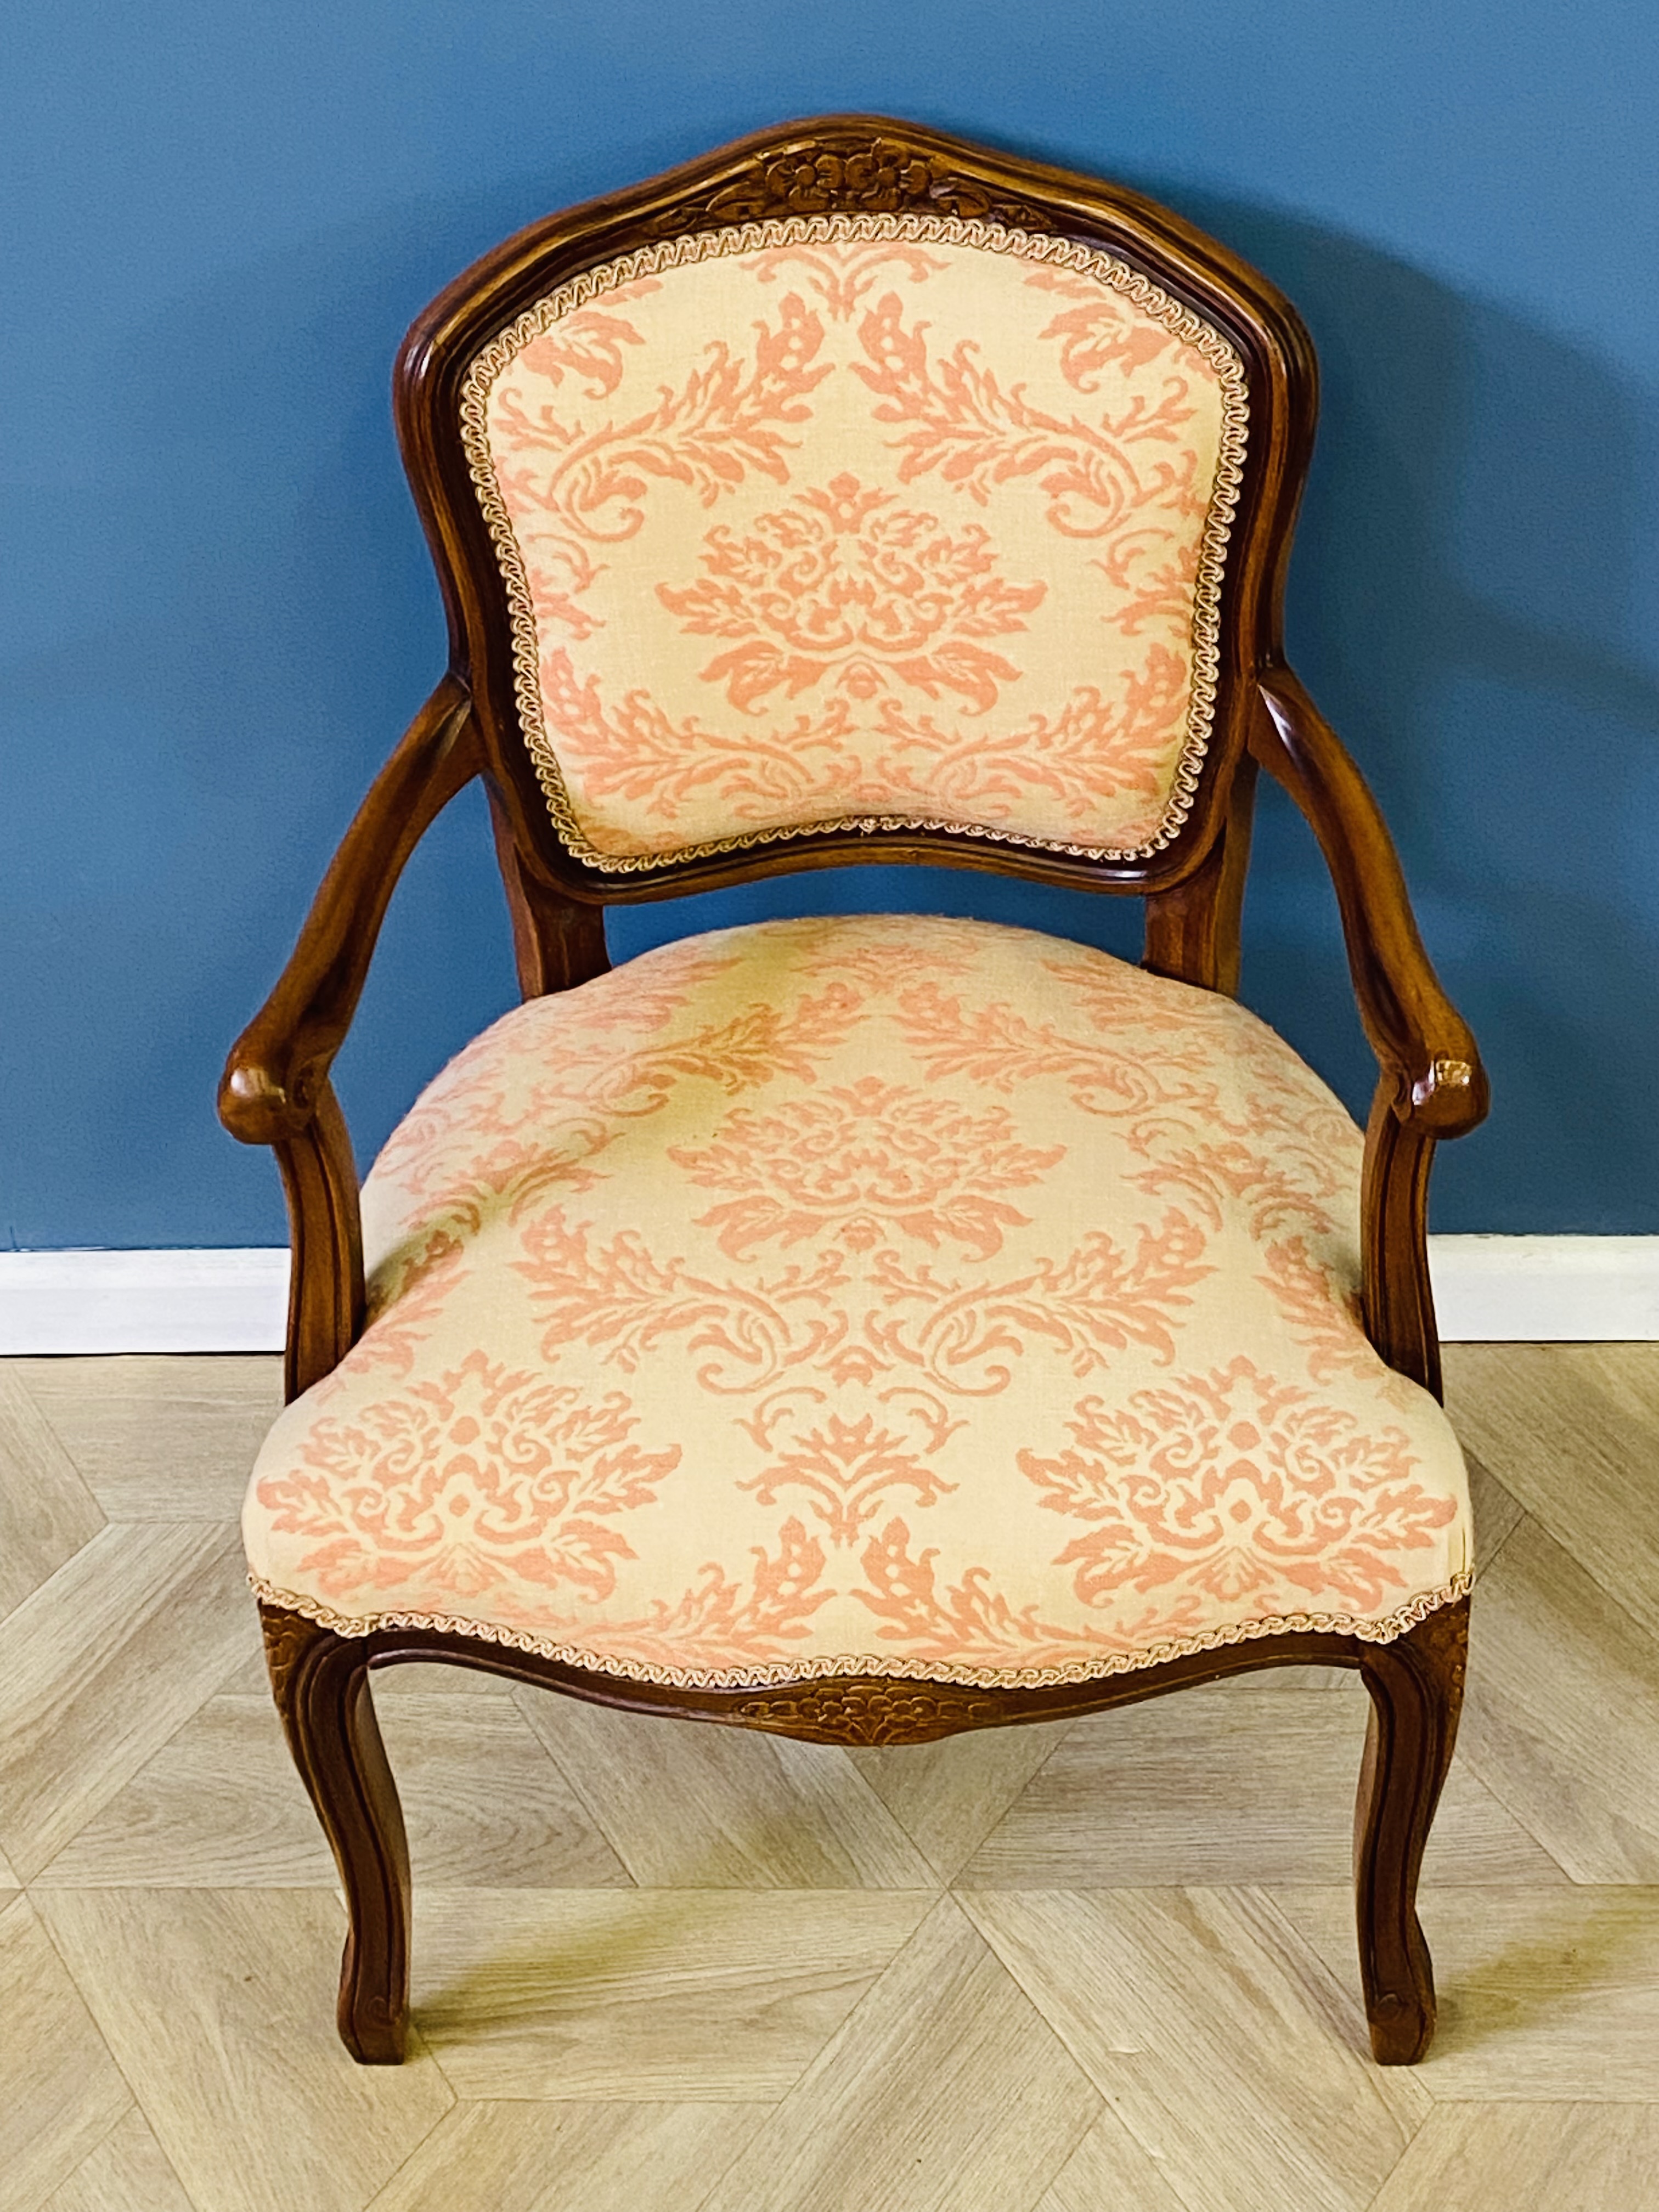 Pair of reproduction French style upholstered elbow chairs - Image 4 of 7